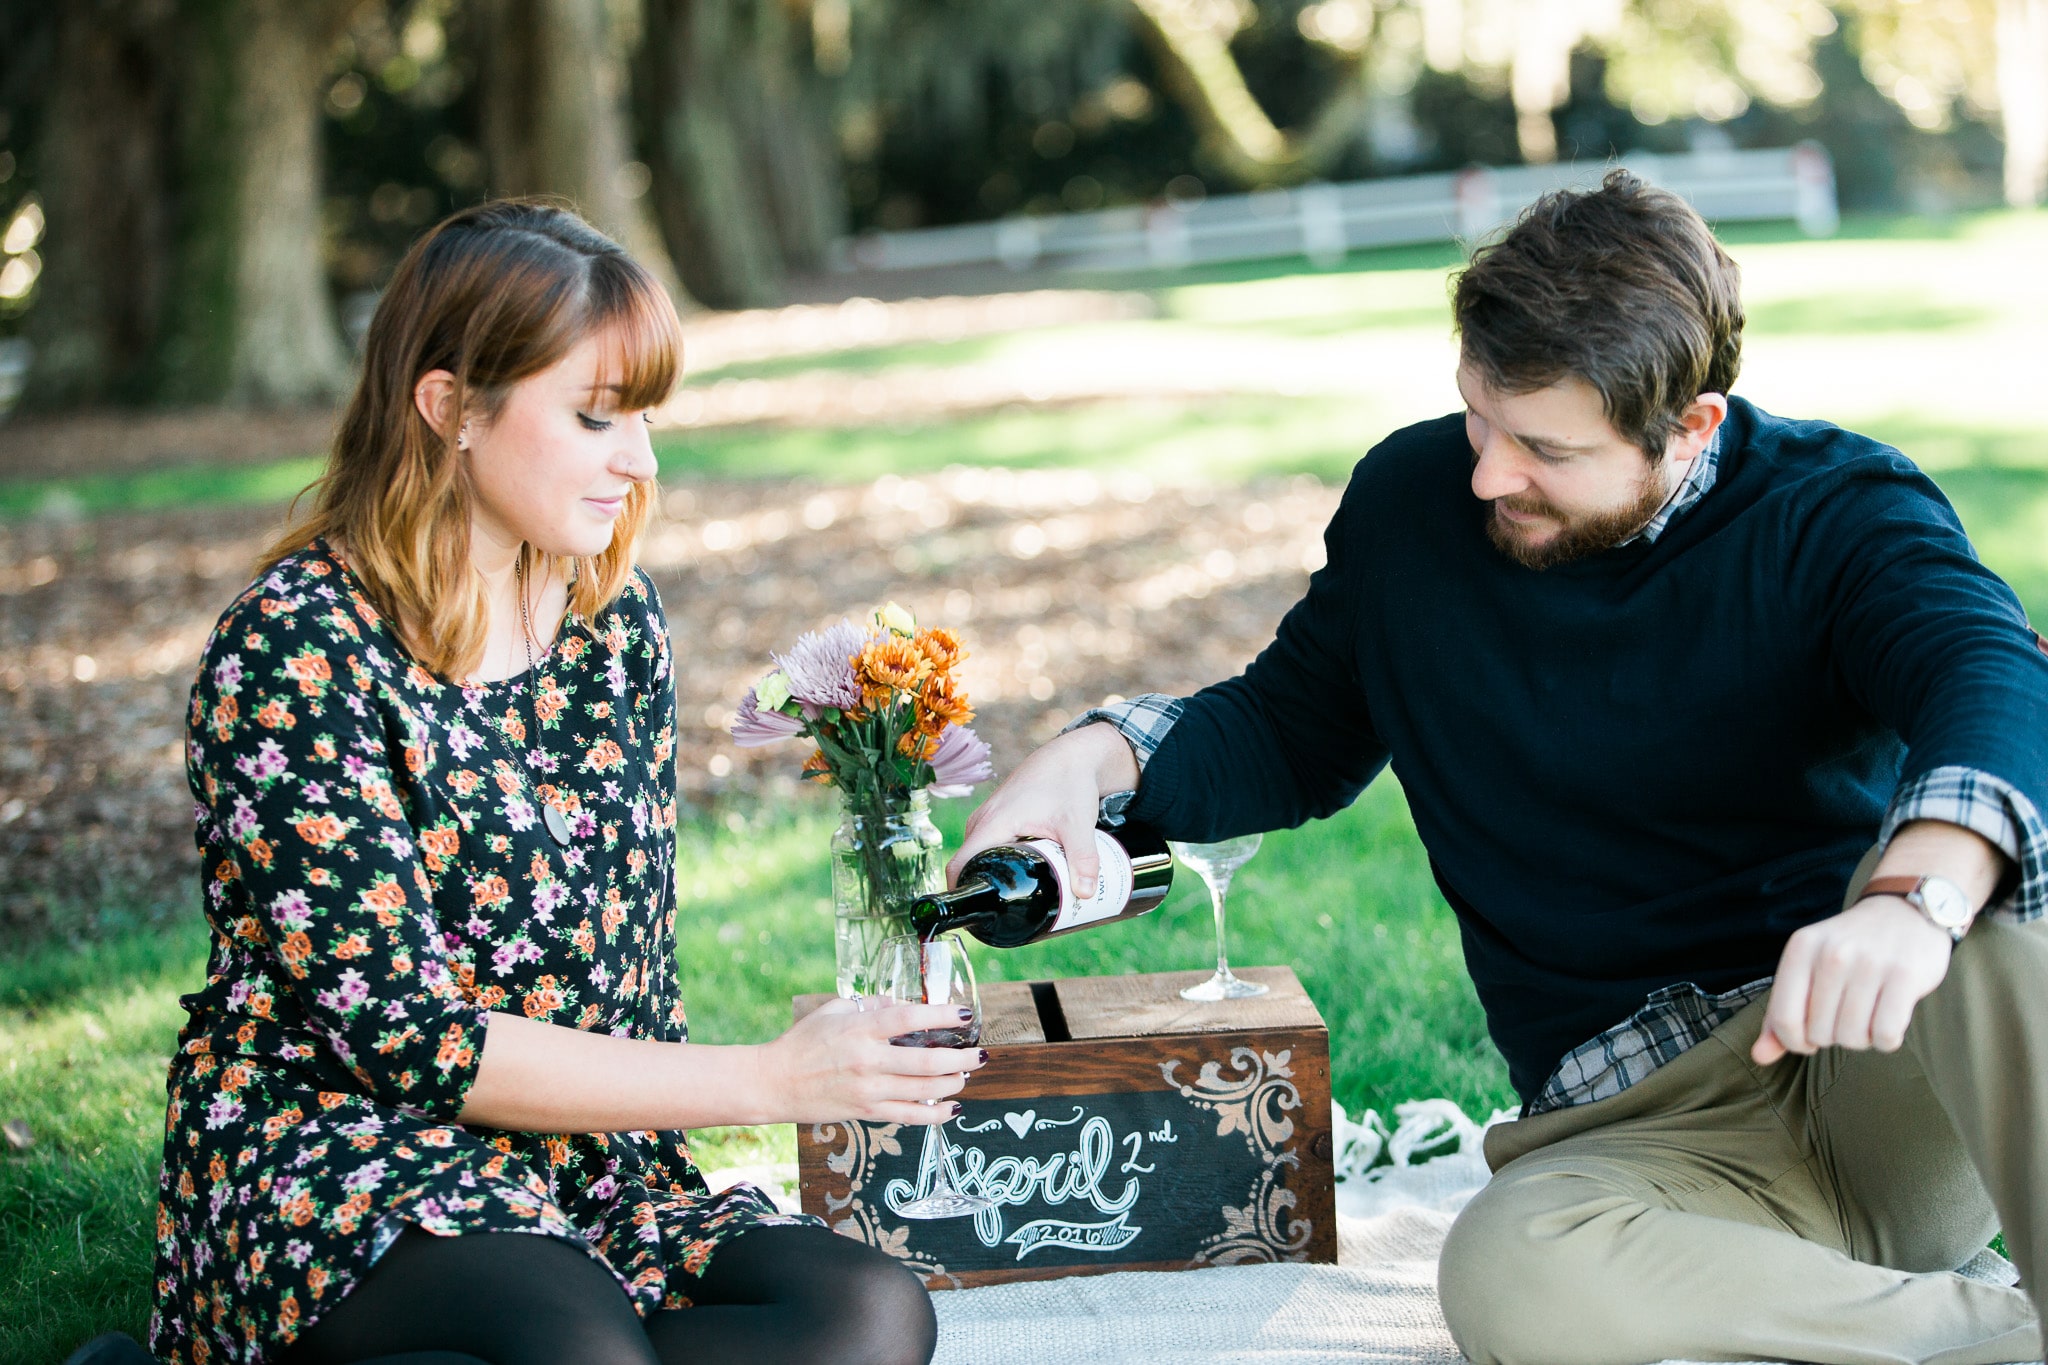 Brian and Kelsey sharing a picnic style bottle of wine, Caledonia Golf and Fish Club, Myrtle Beach Engagement Session 4, www.onelifephoto.net